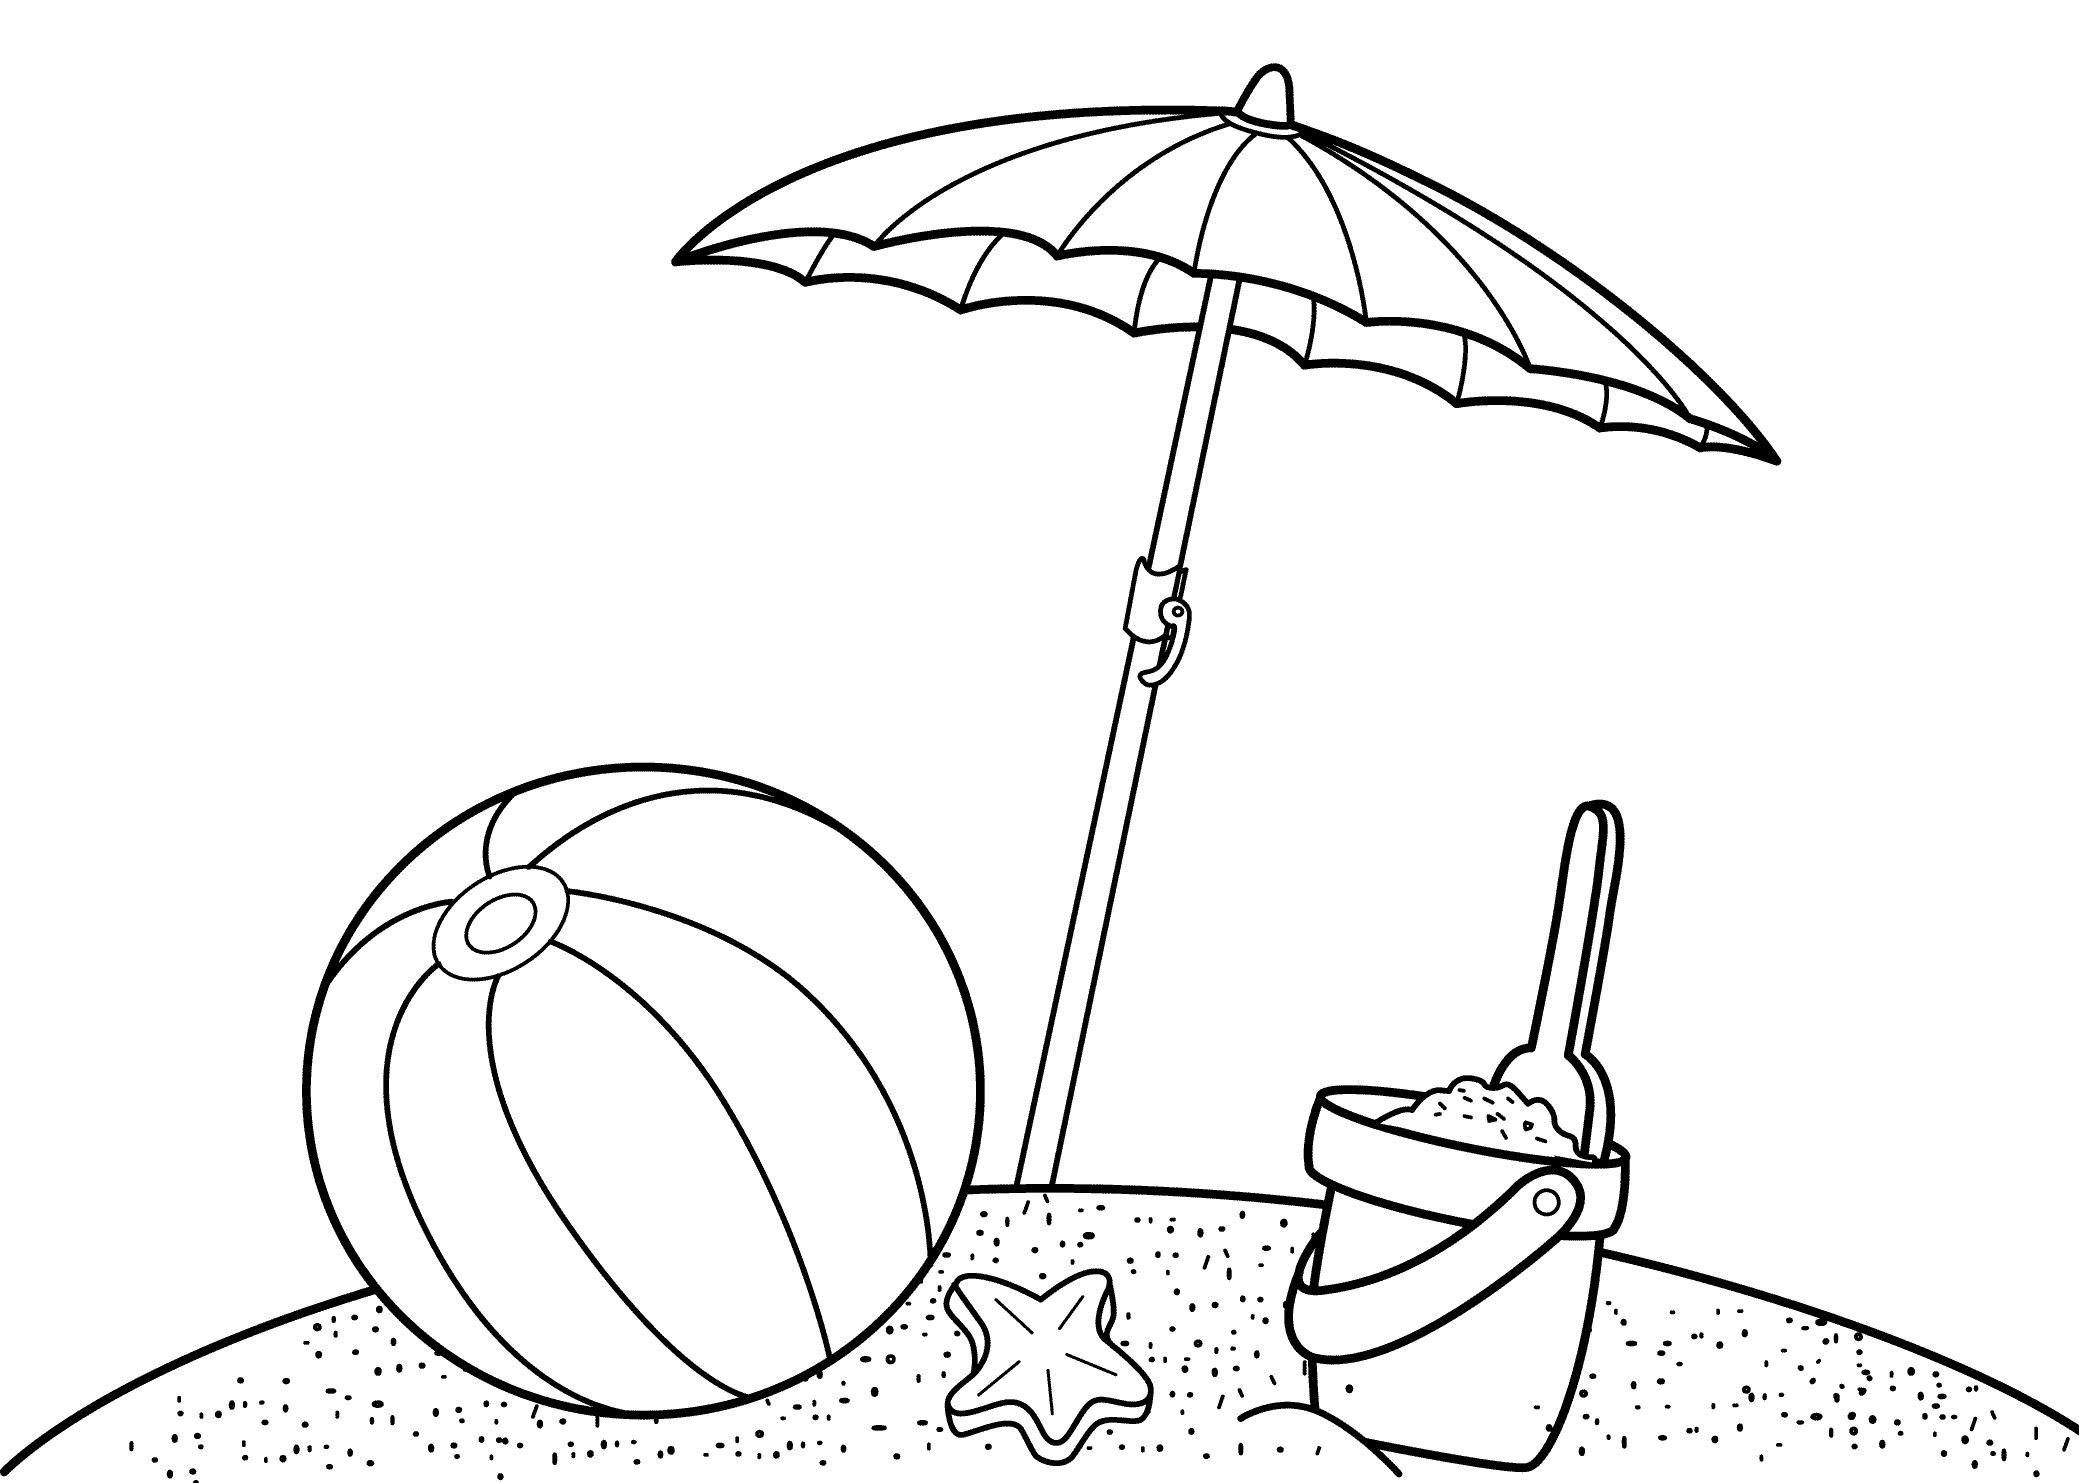 Free Printable Summer Coloring Pages
 Download Free Printable Summer Coloring Pages for Kids